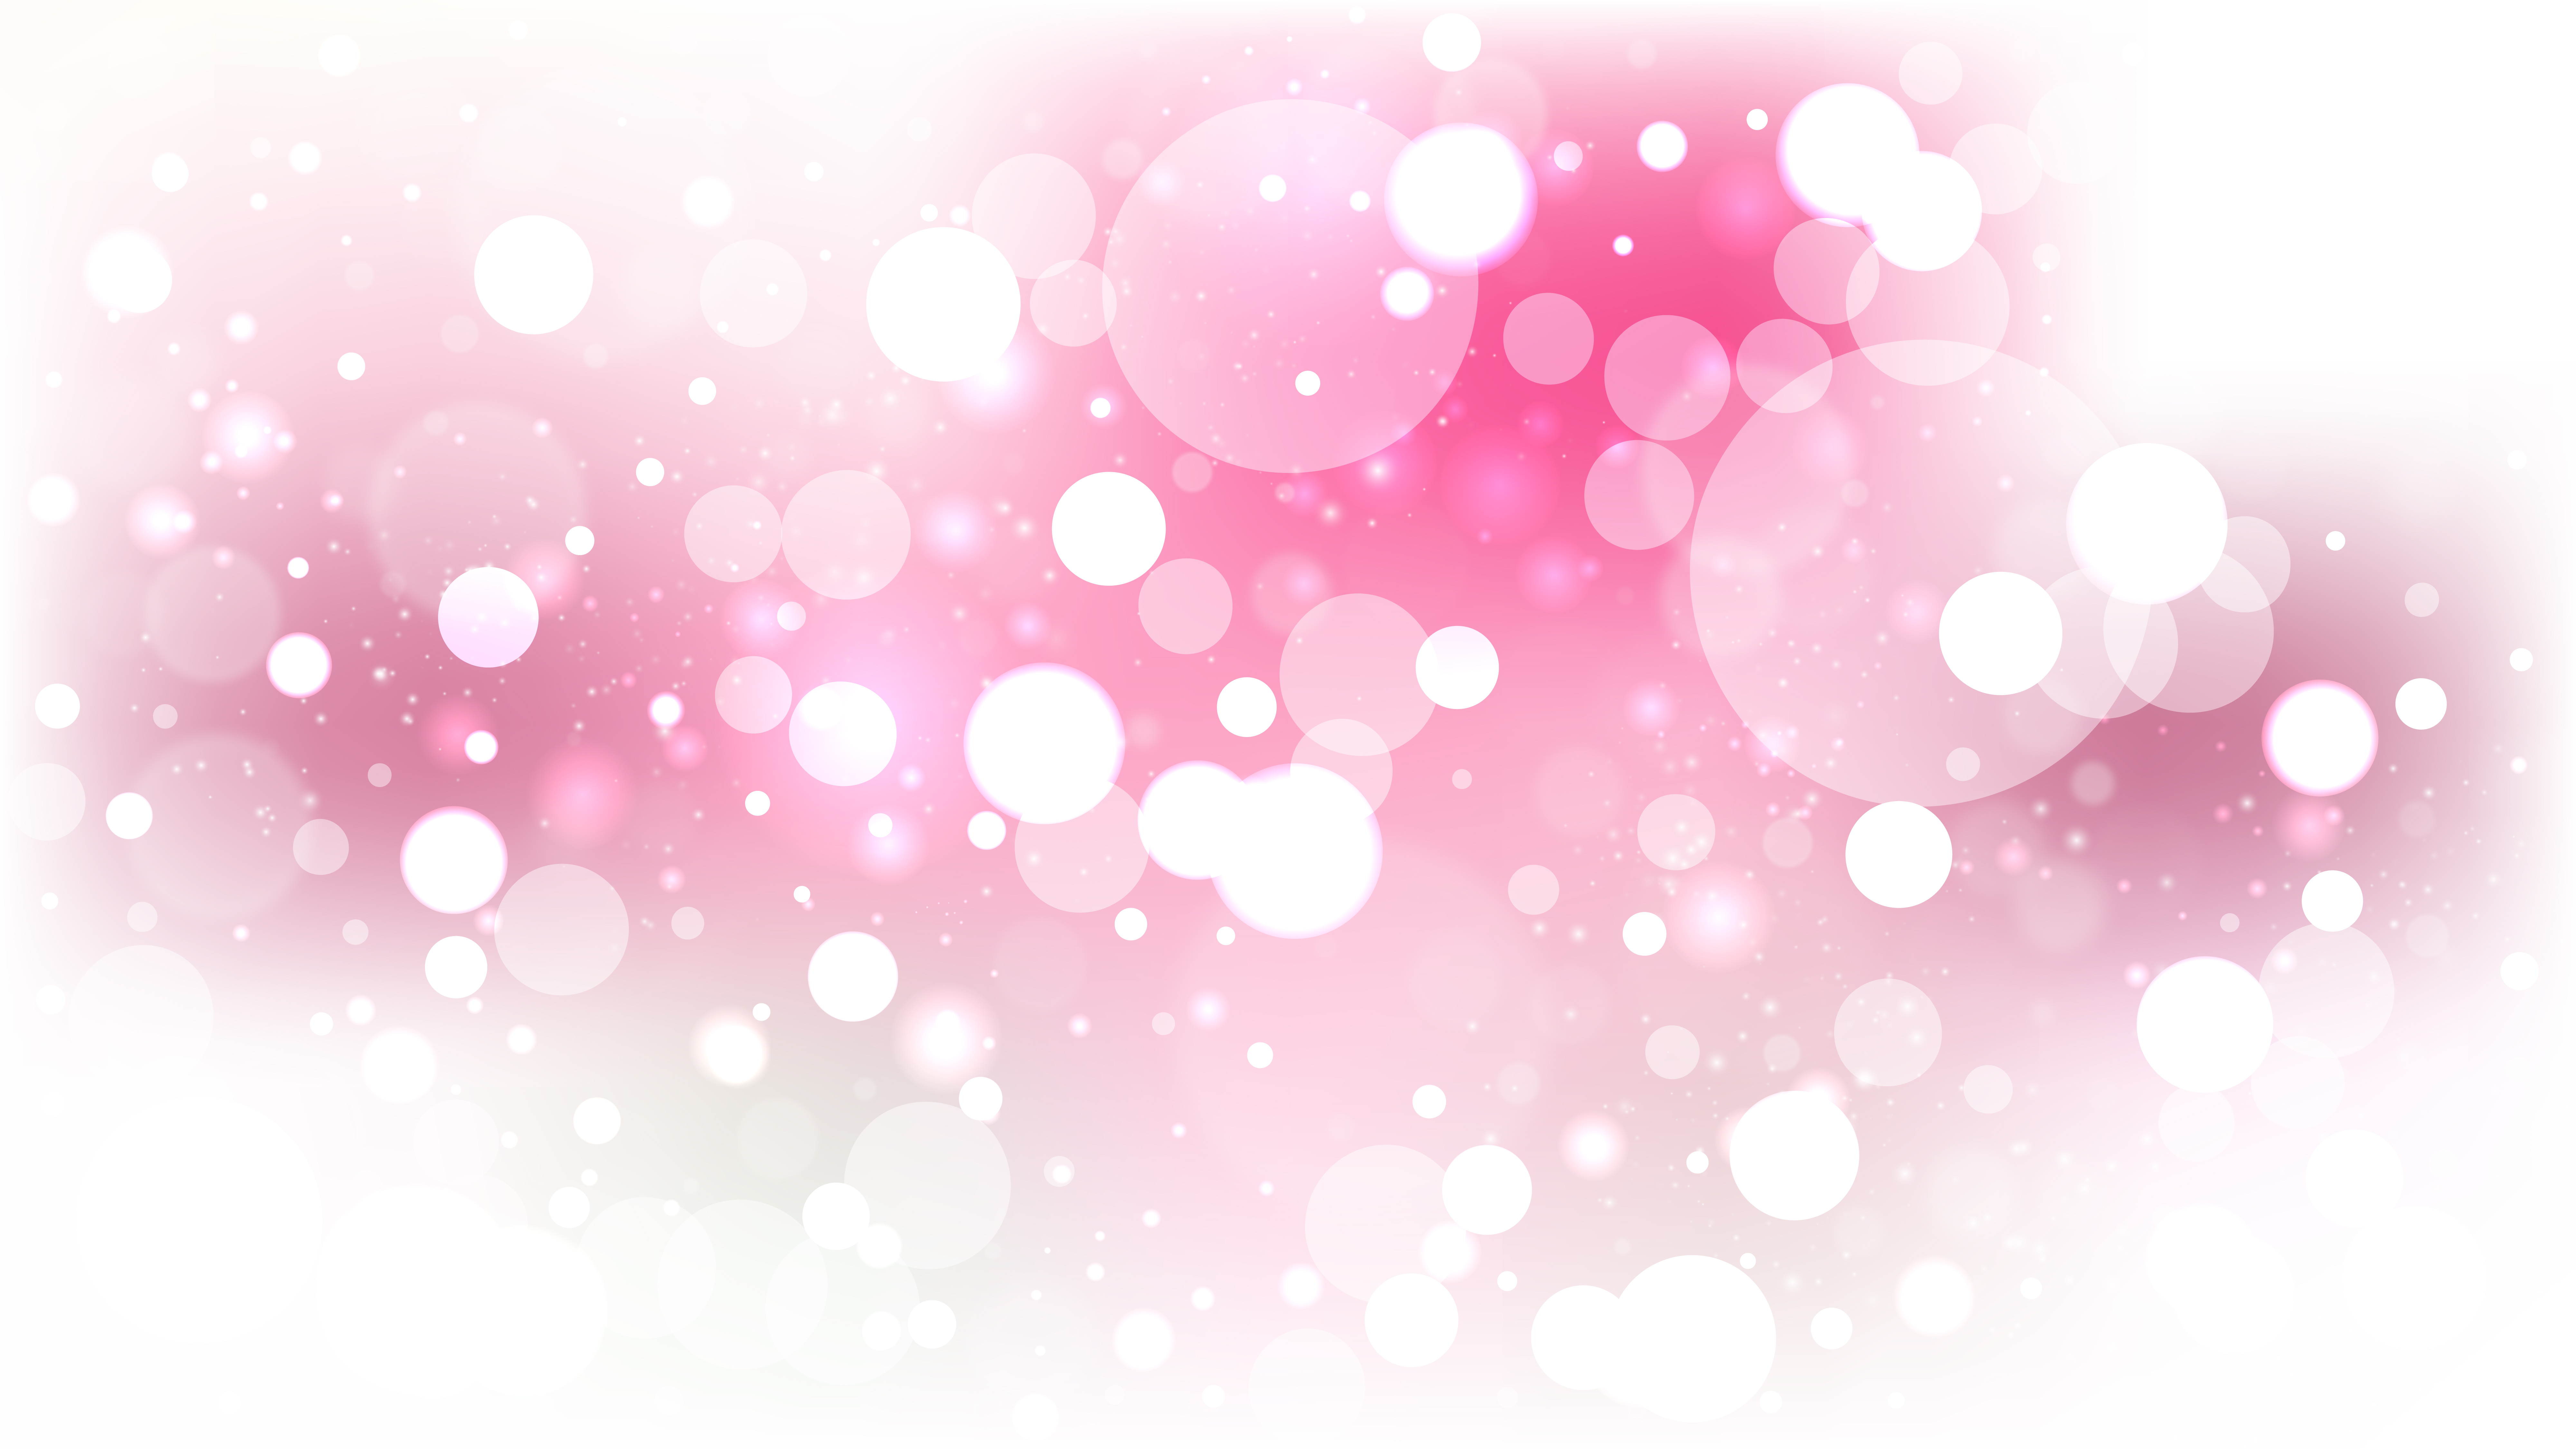 Free Pink and White Bokeh Background Graphic